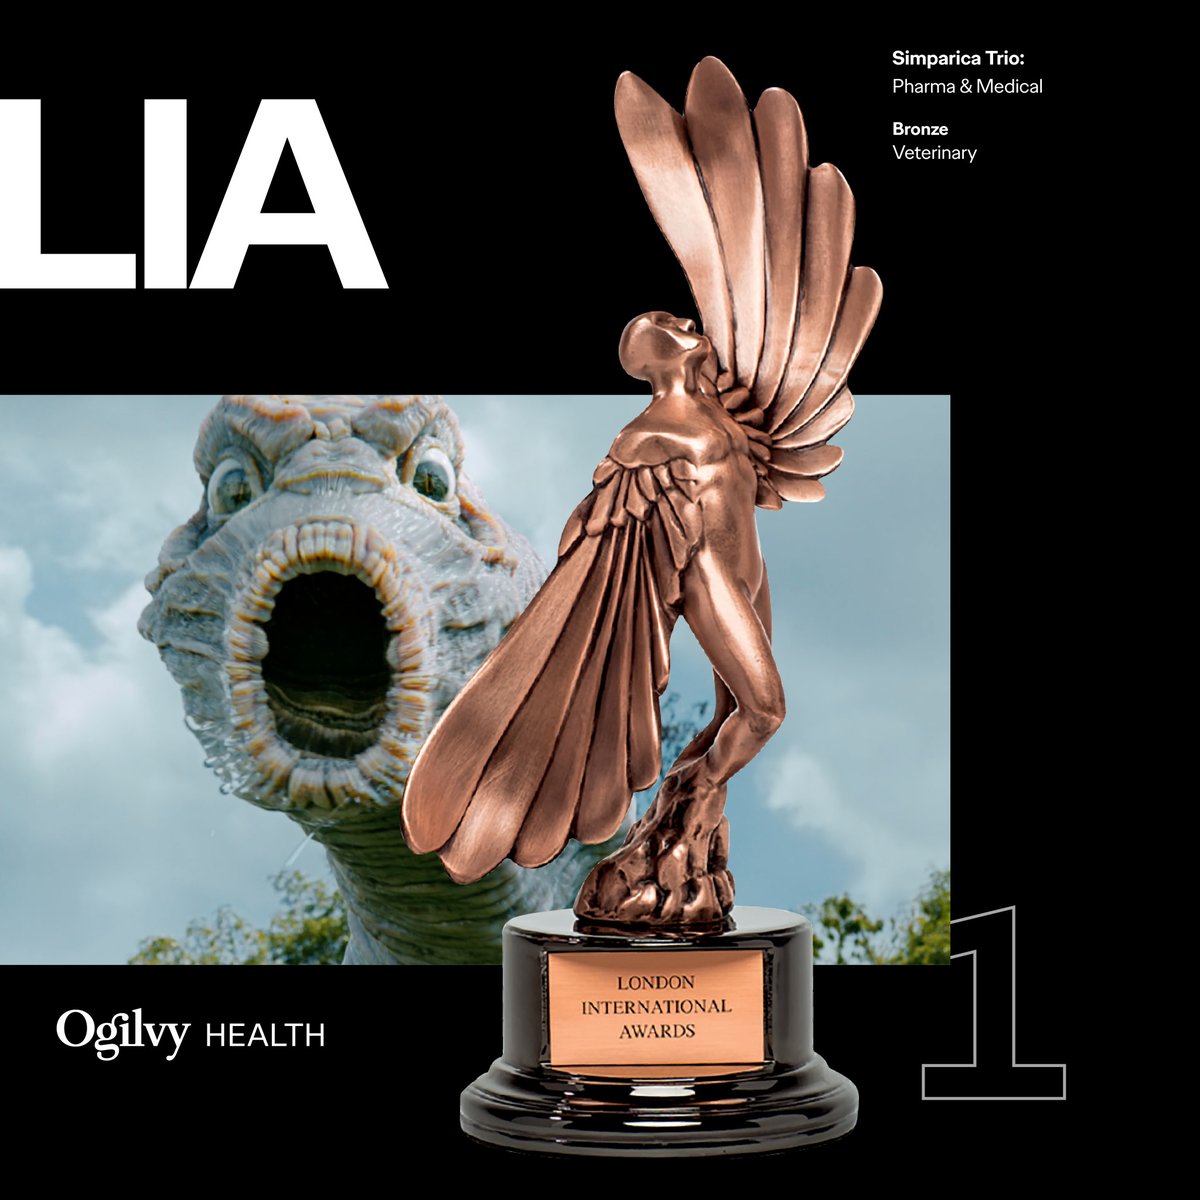 A BRONZE @LIAawards for Simparica Trio in the Pharma & Medical - Veterinary category! Cheers to our clients and the OH team who worked on this incredible campaign and for always looking out for man’s best friend. #ClientWork